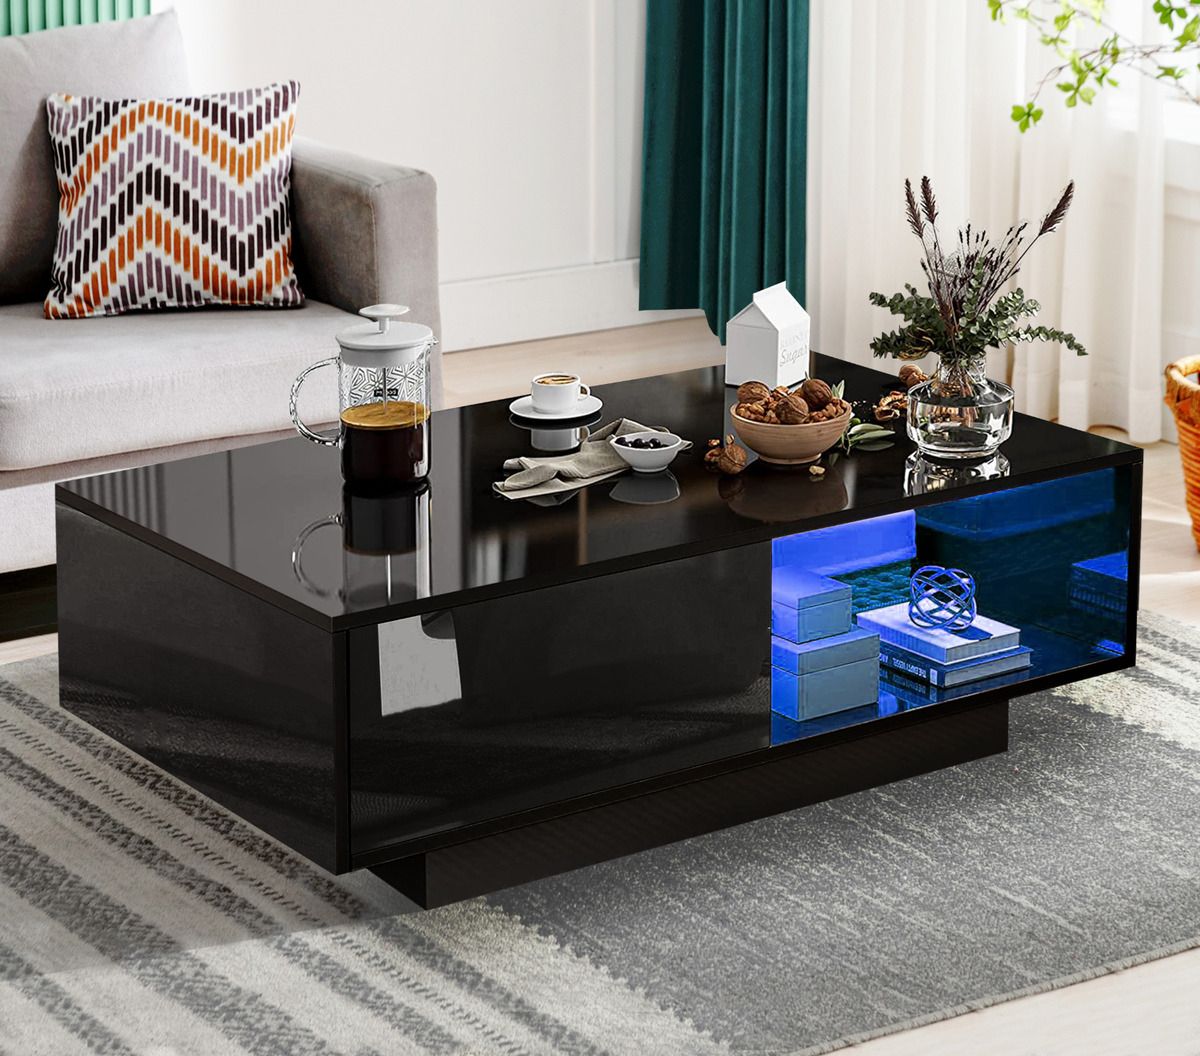 Black Led Wooden Coffee Table With Storage Drawers High Gloss Modern Living  Room | Ebay With High Gloss Black Coffee Tables (View 13 of 15)